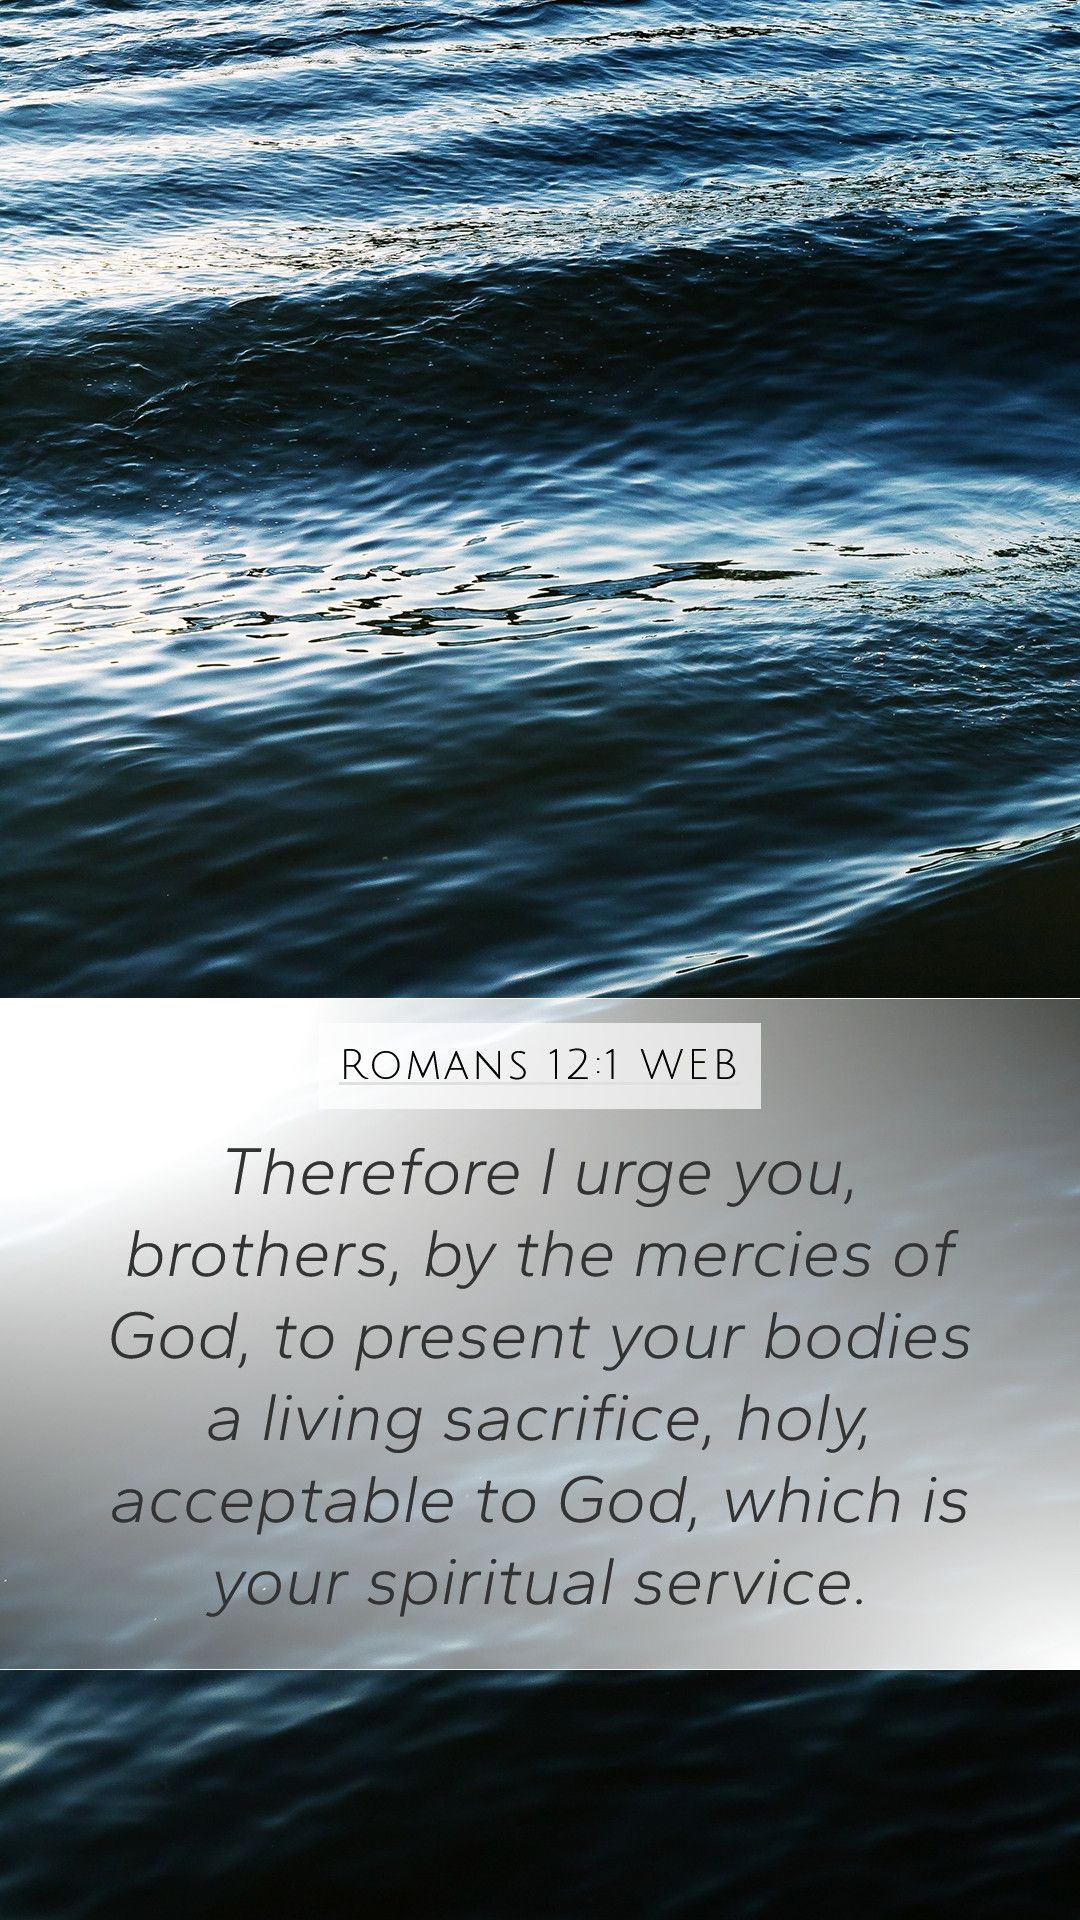 Therefore I urge you, brothers, by the mercies of God, to present your bodies a living sacrifice, holy, acceptable to God, which is your spiritual service. - Christian